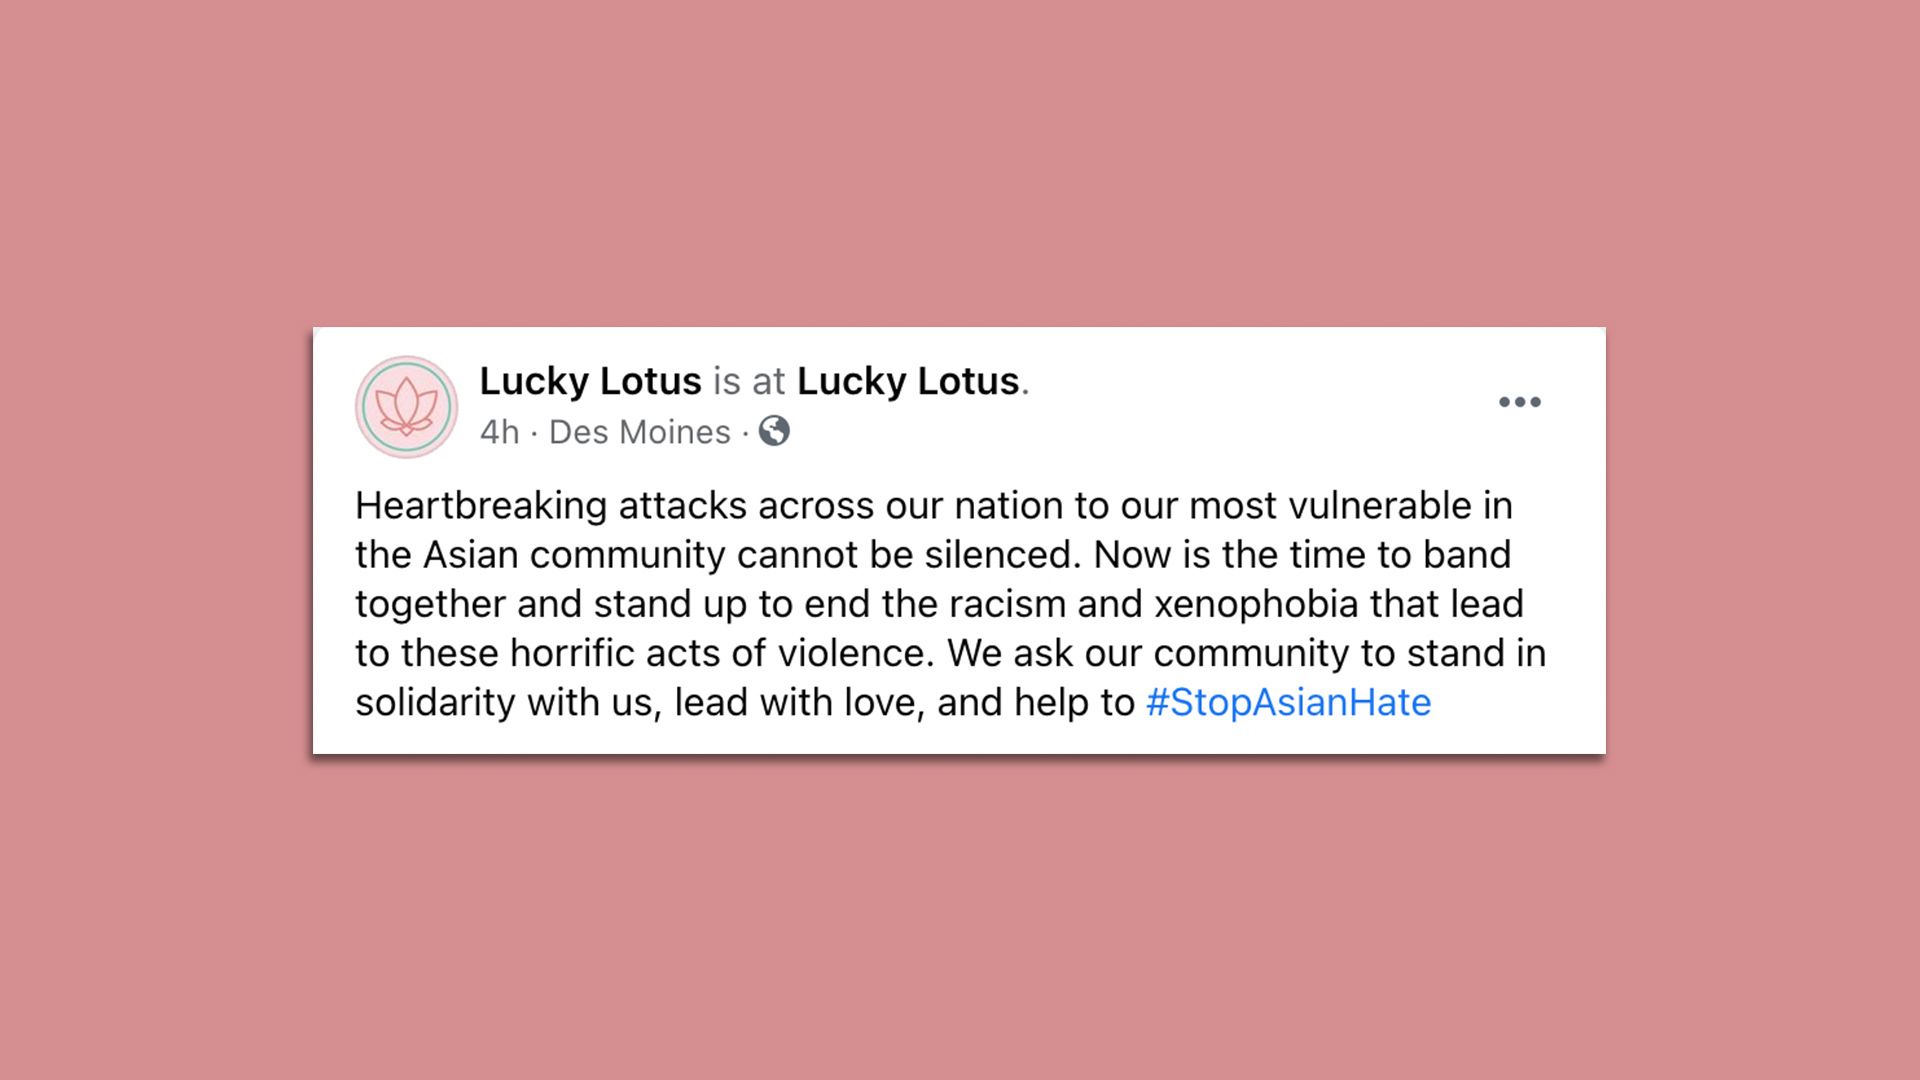 A screenshot of a Facebook post by Lucky Lotus that calls for the end of Asian hate.